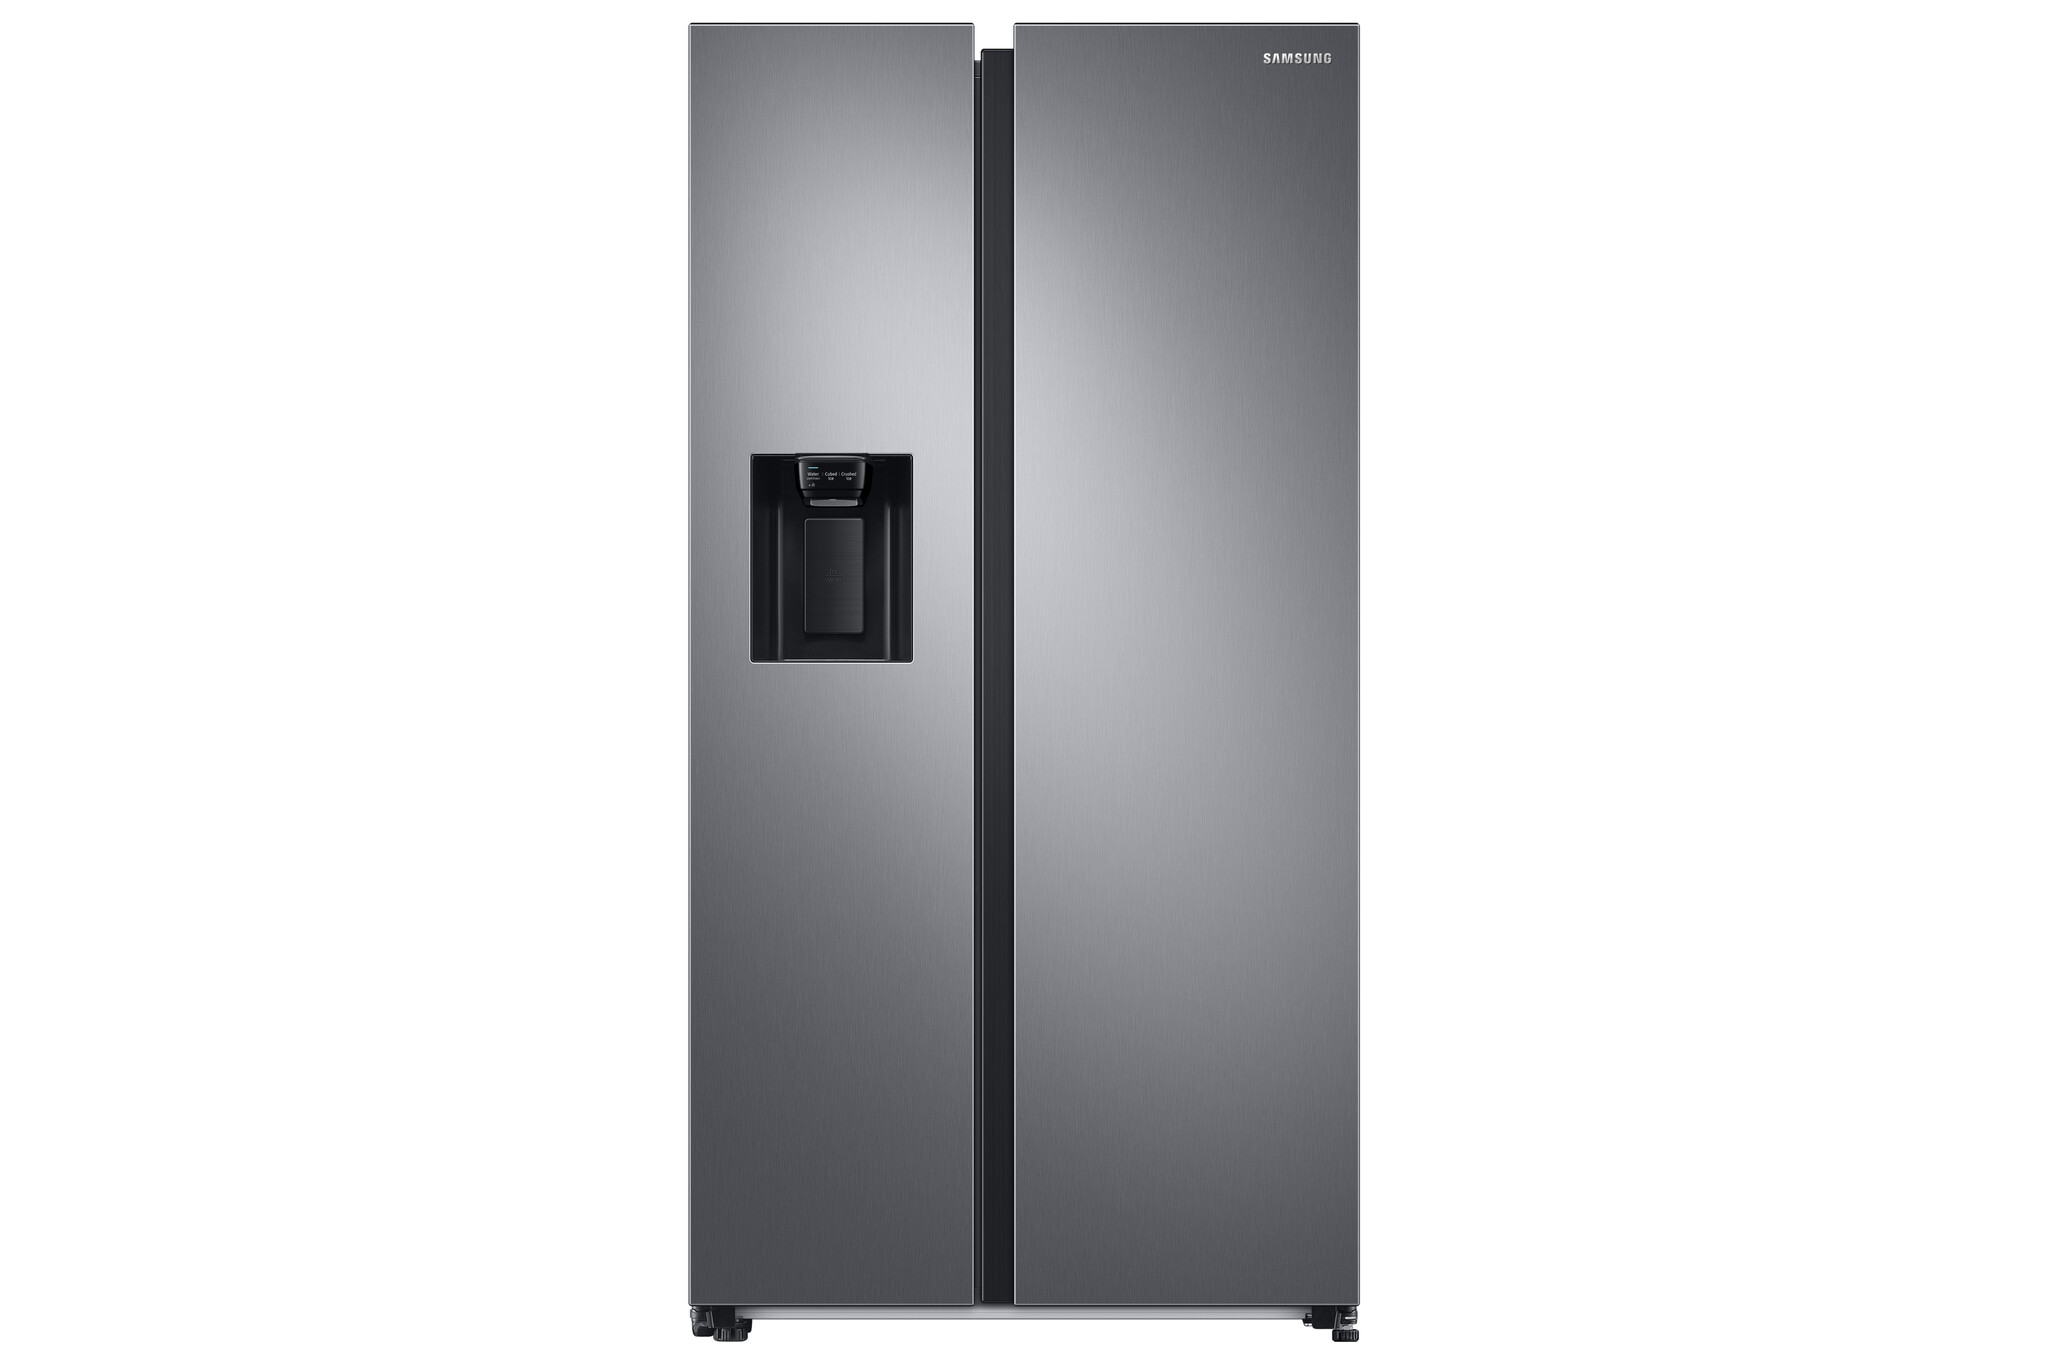 TEST – Samsung RS68A8840S9 Plumbed Total No Frost American Fridge Freezer – Brushed Steel – F Rated #R3CYCL3